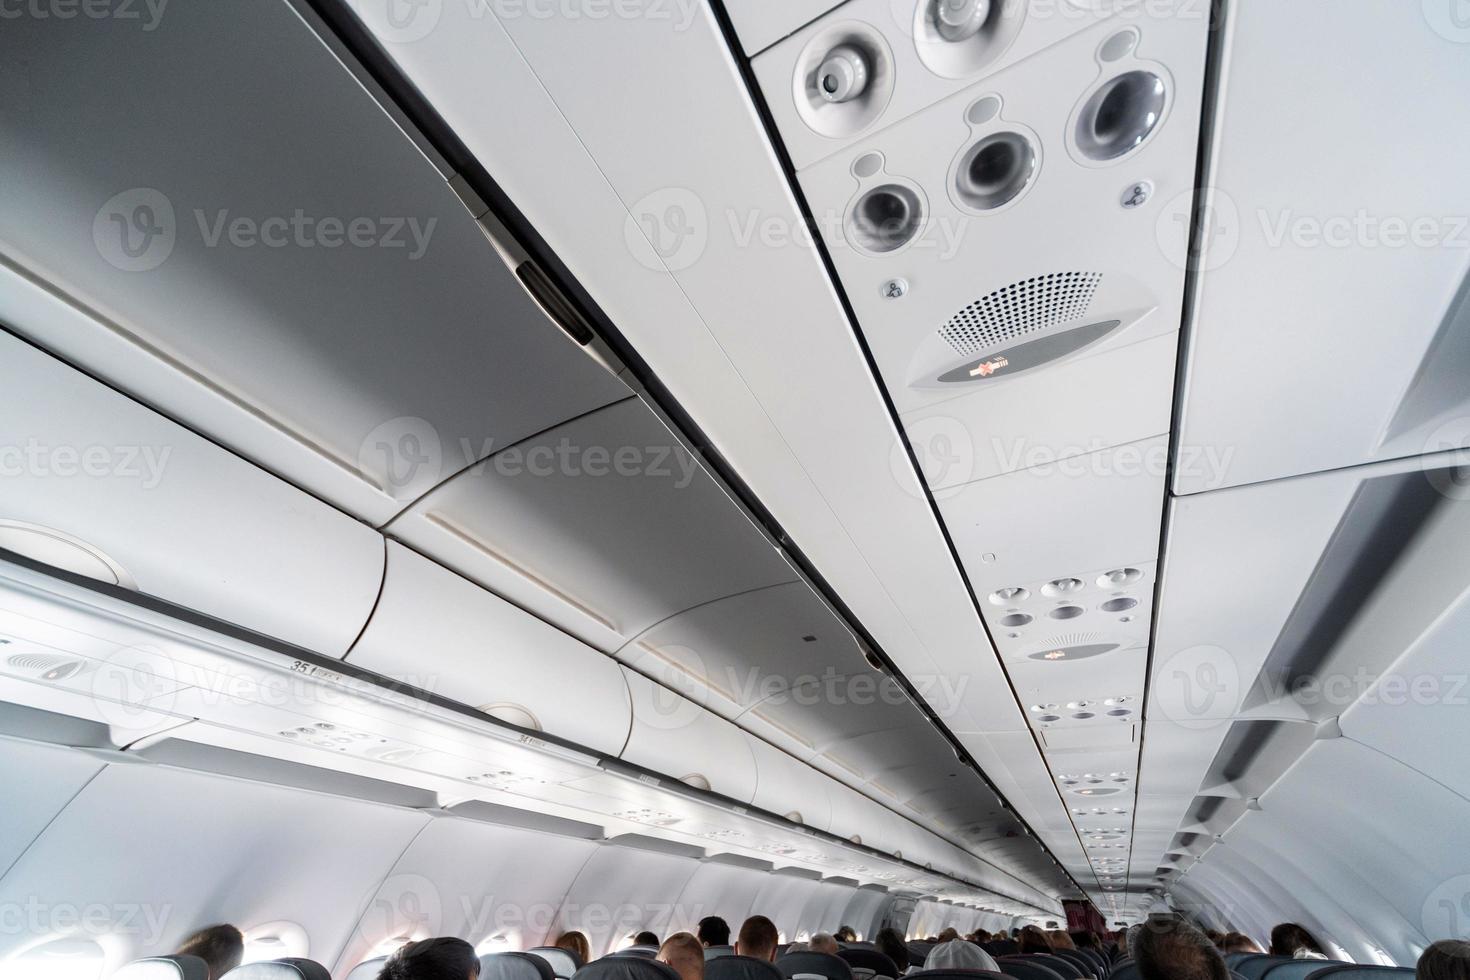 Airplane air conditioning control panel over seats. Stuffy air in aircraft cabin with people. New low-cost airline. photo